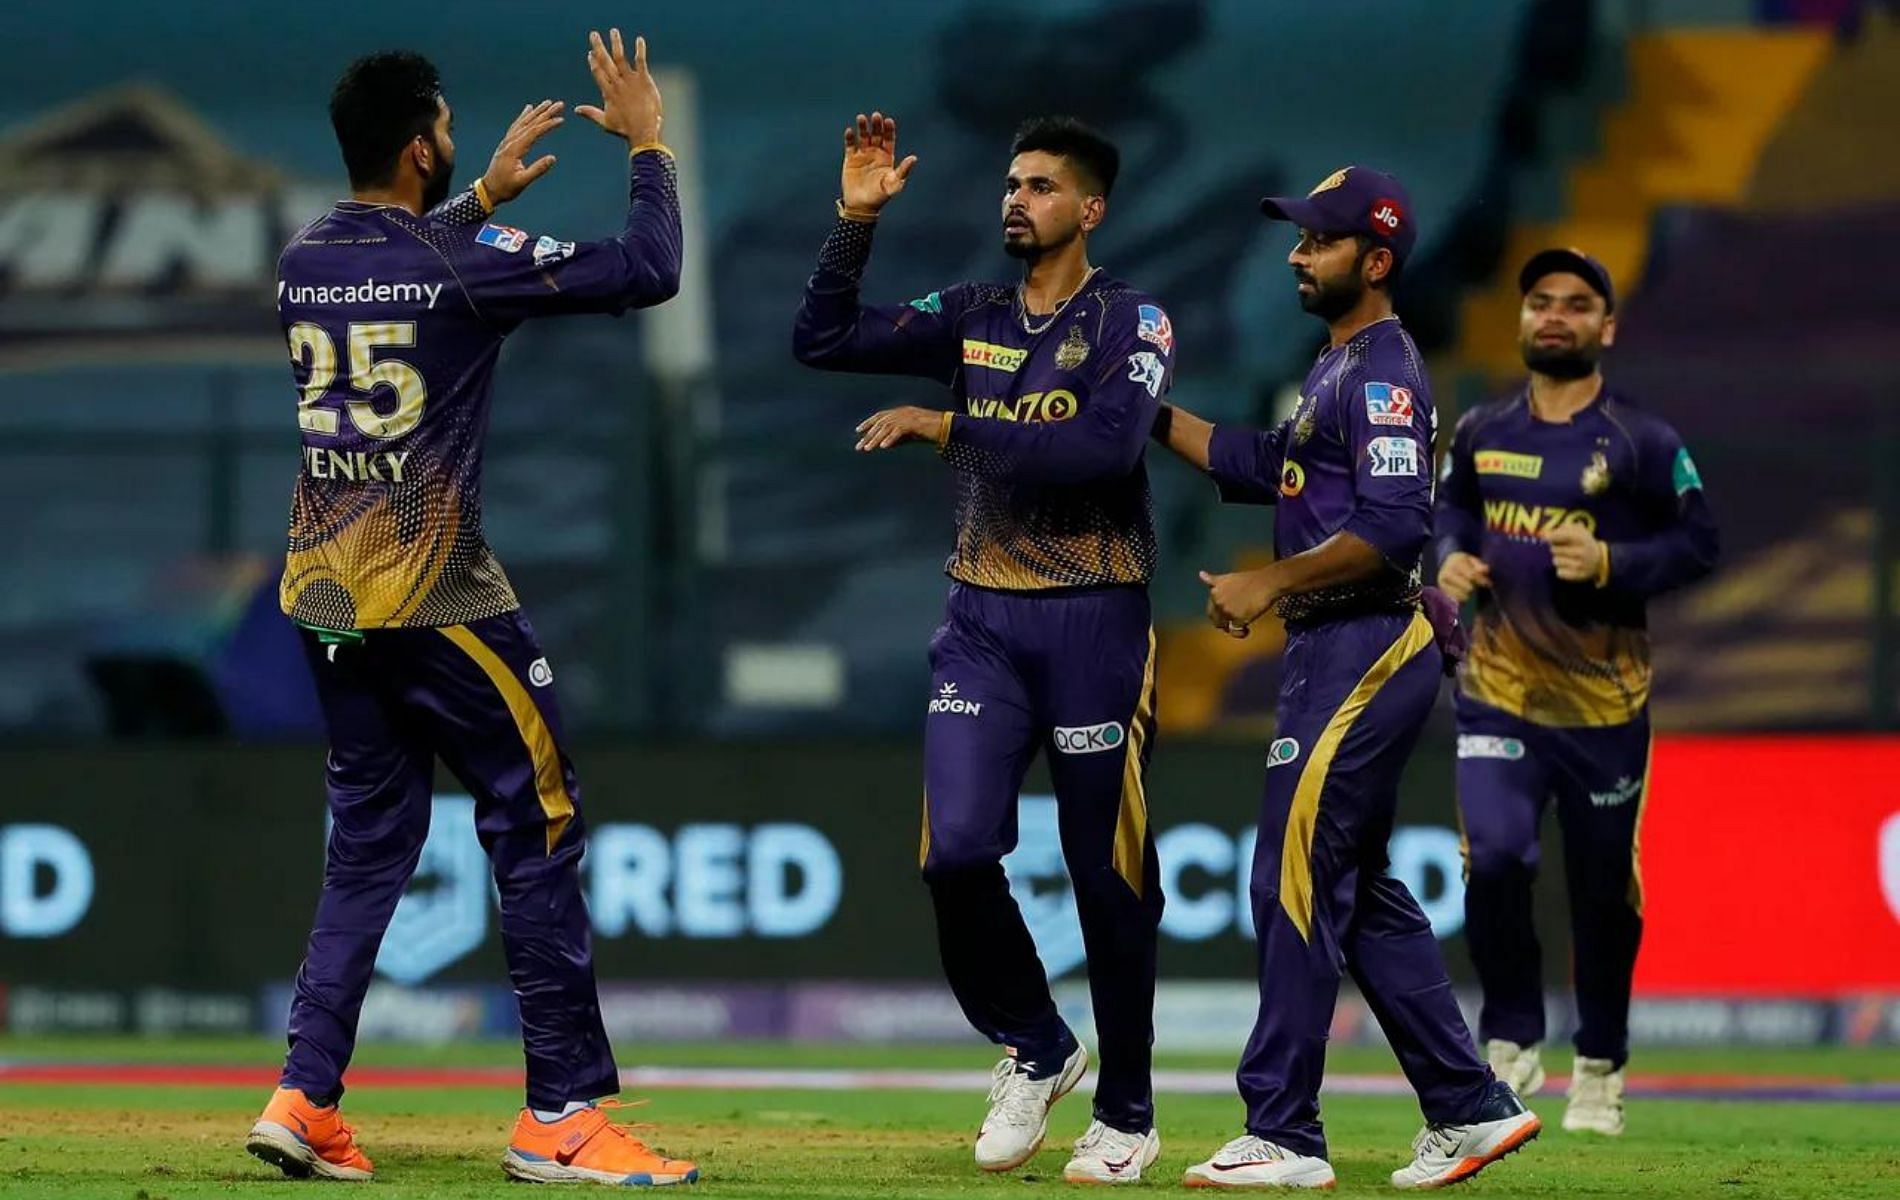 The Knight Riders suffered their 6th loss in IPL 2022 on Monday (Image: IPLT20.com)